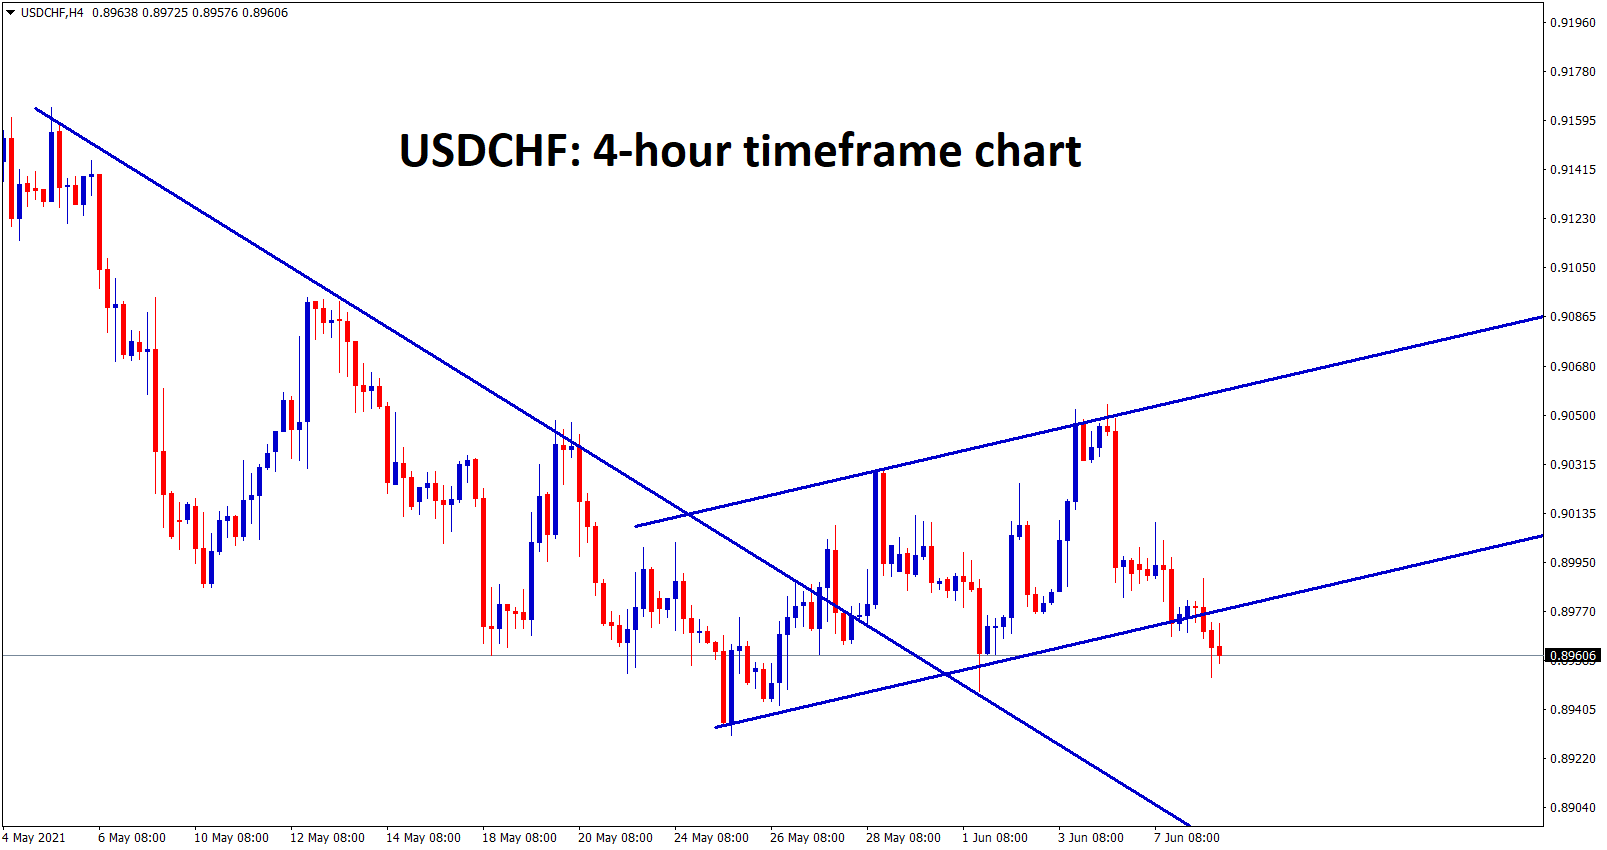 USDCHF is consolidating at the support zone